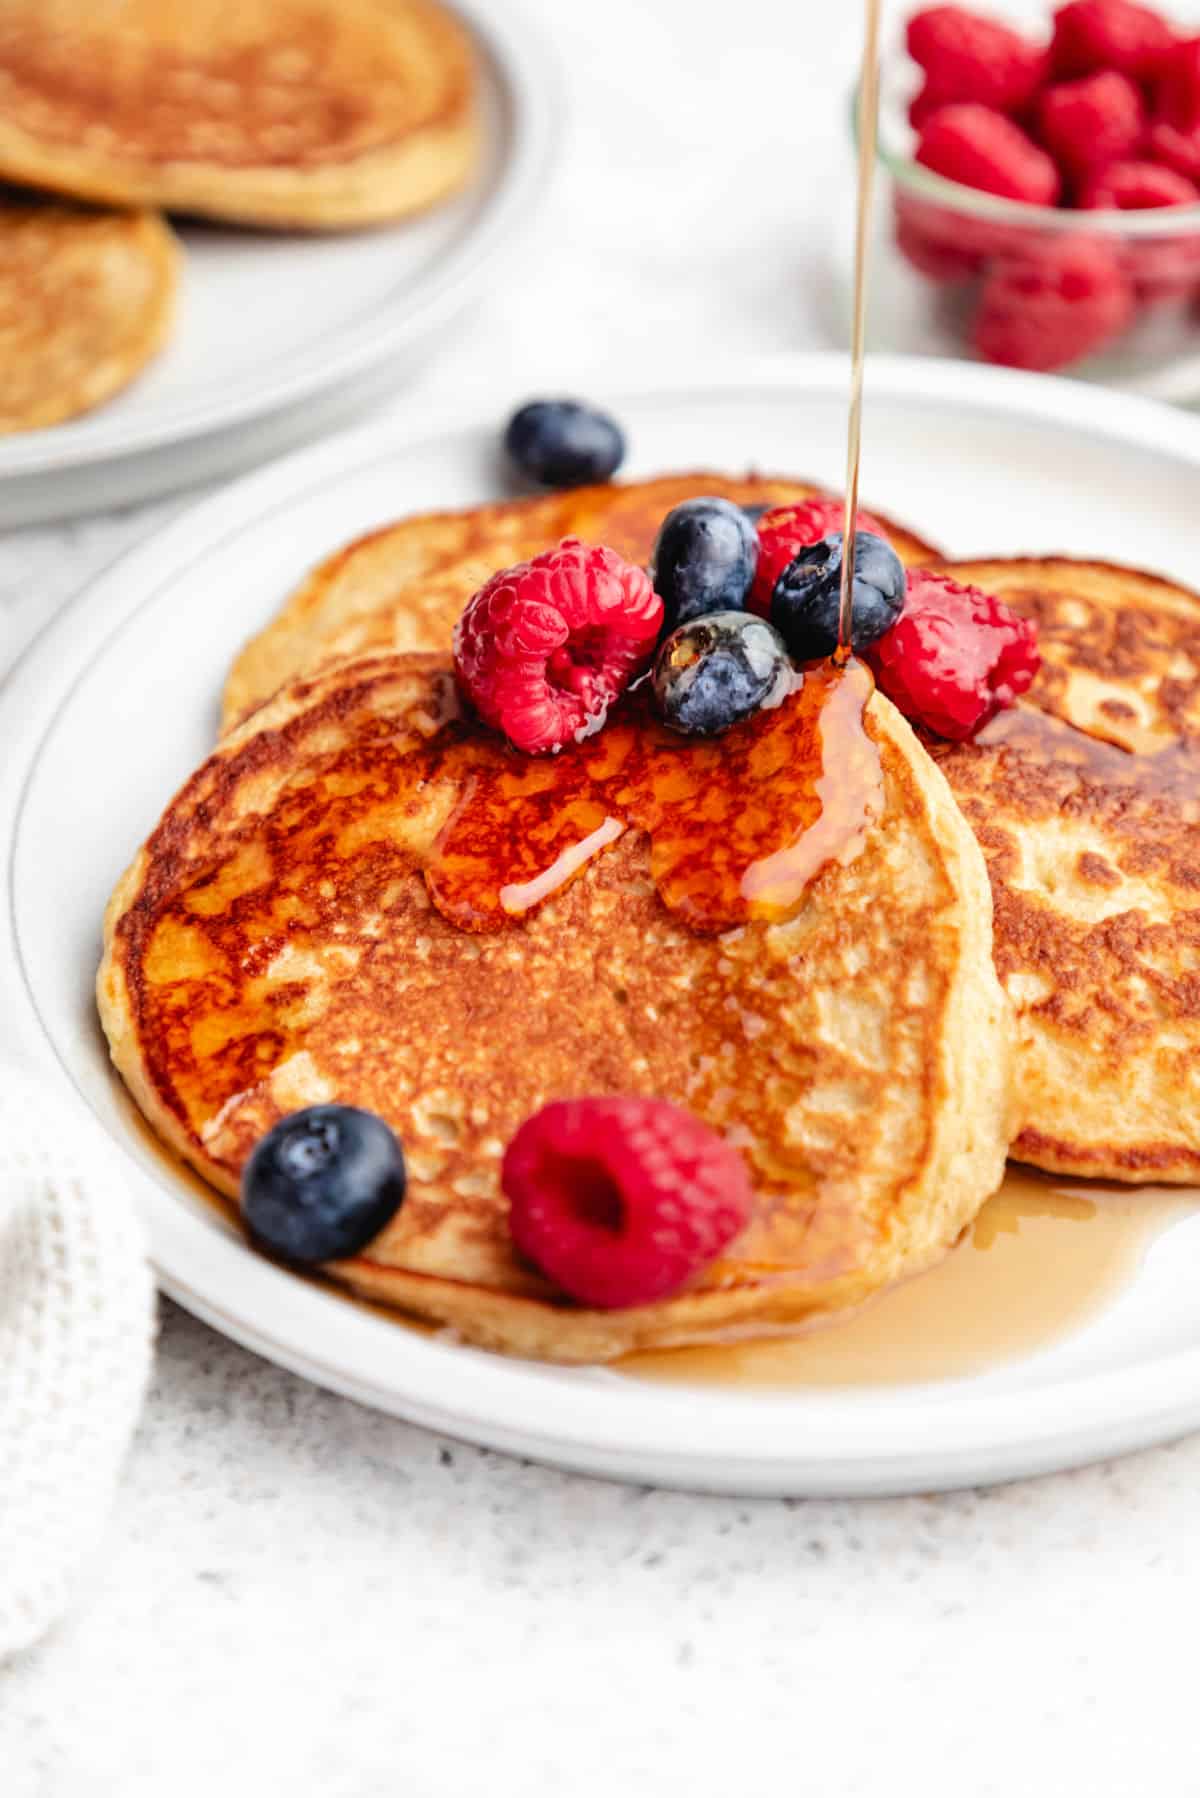 Maple syrup pouring onto cottage cheese pancakes topped with berries.